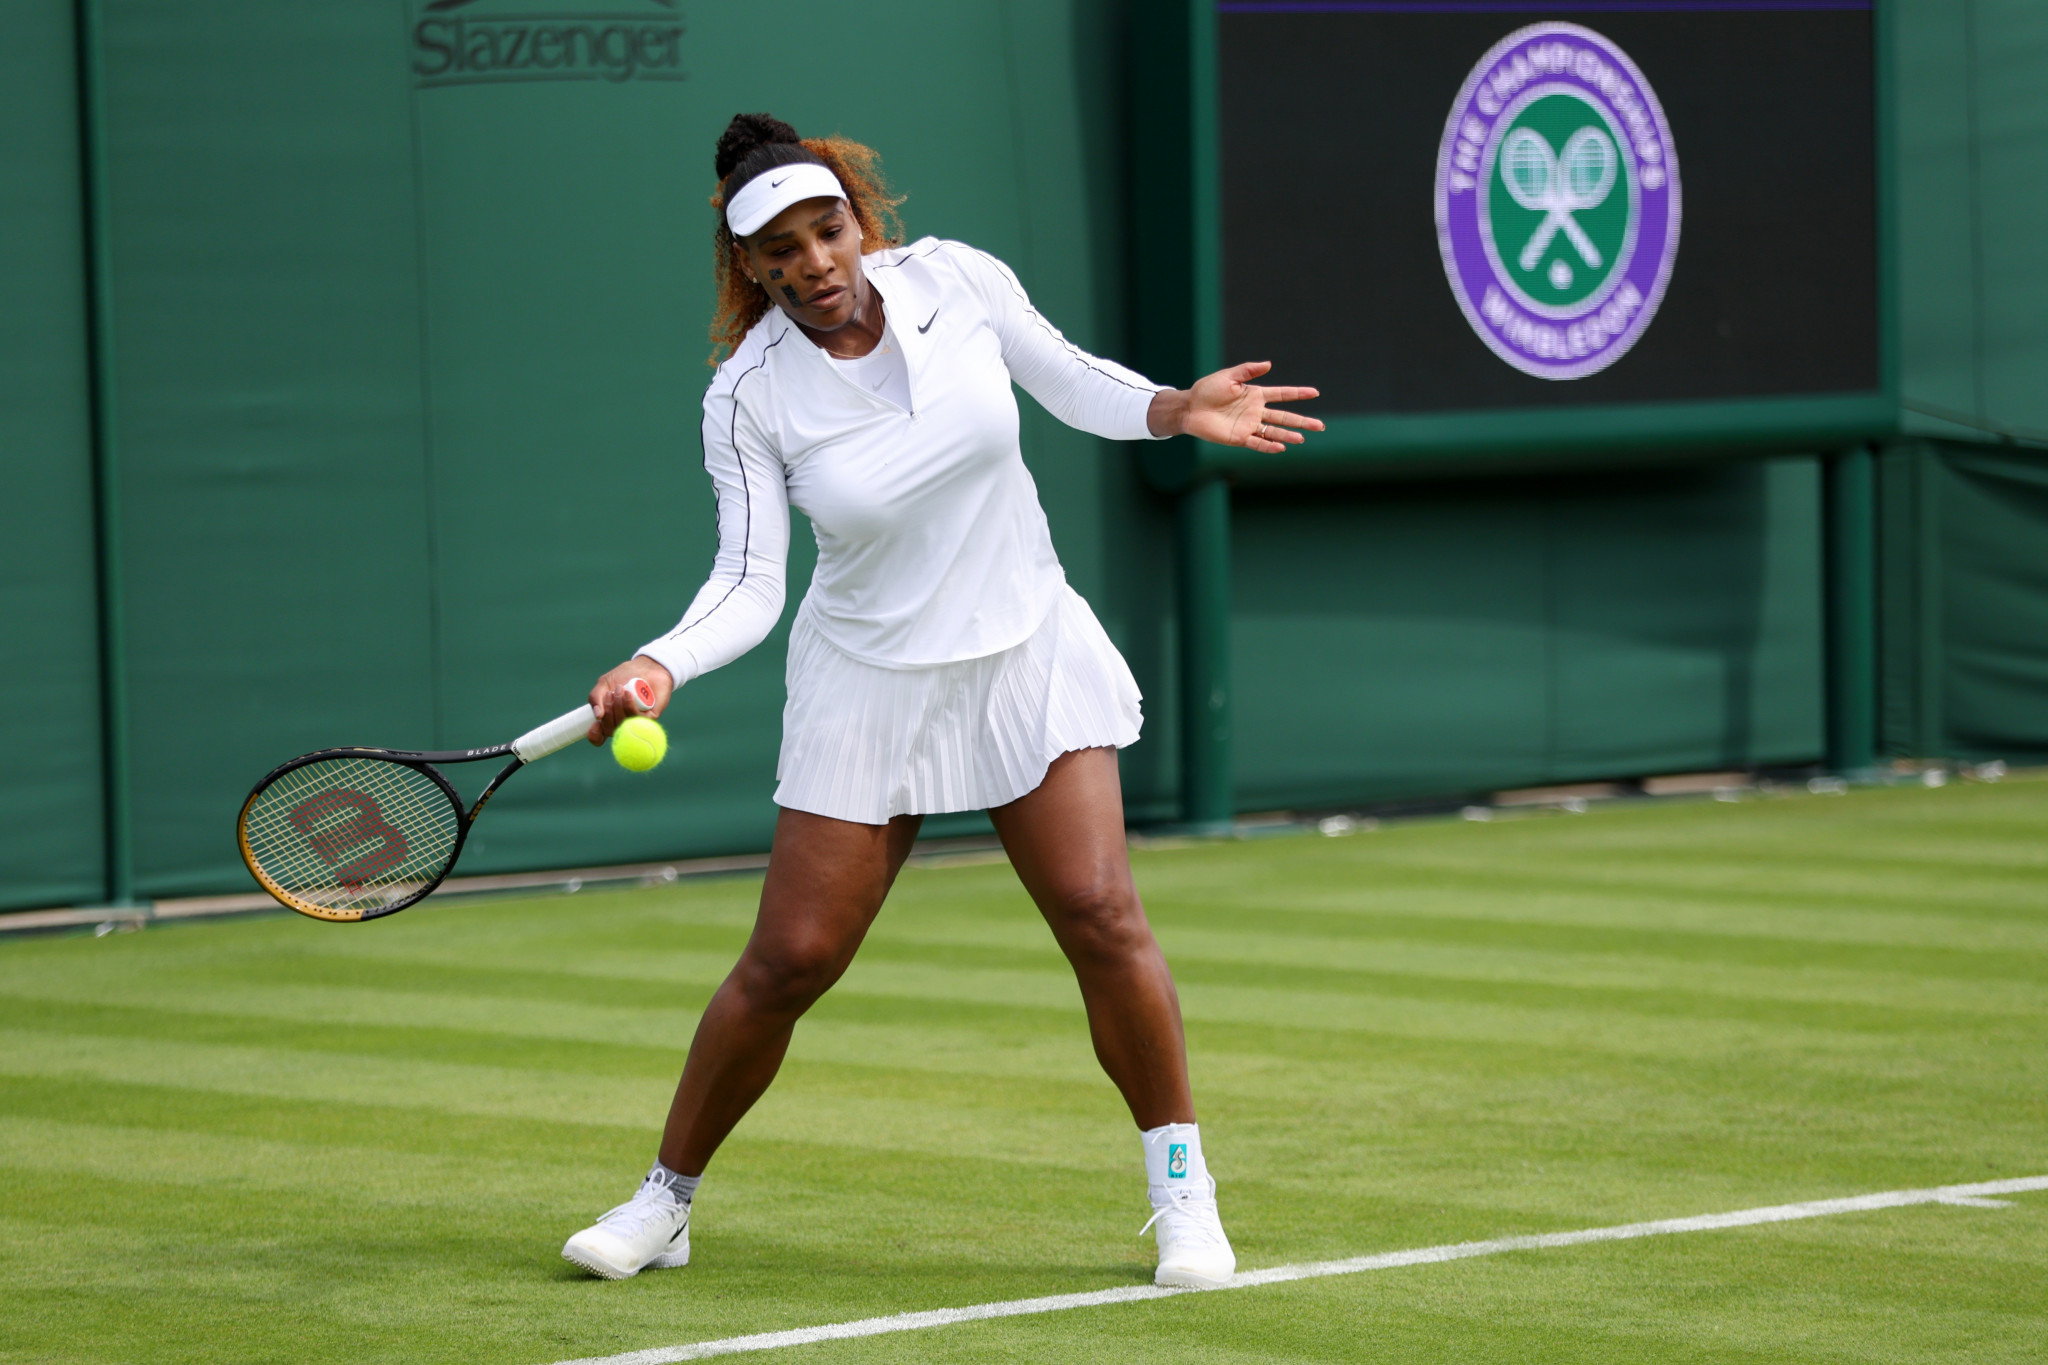 Serena Williams has returned to Wimbledon after coming back from a year-long lay-off due to injury ©Getty Images